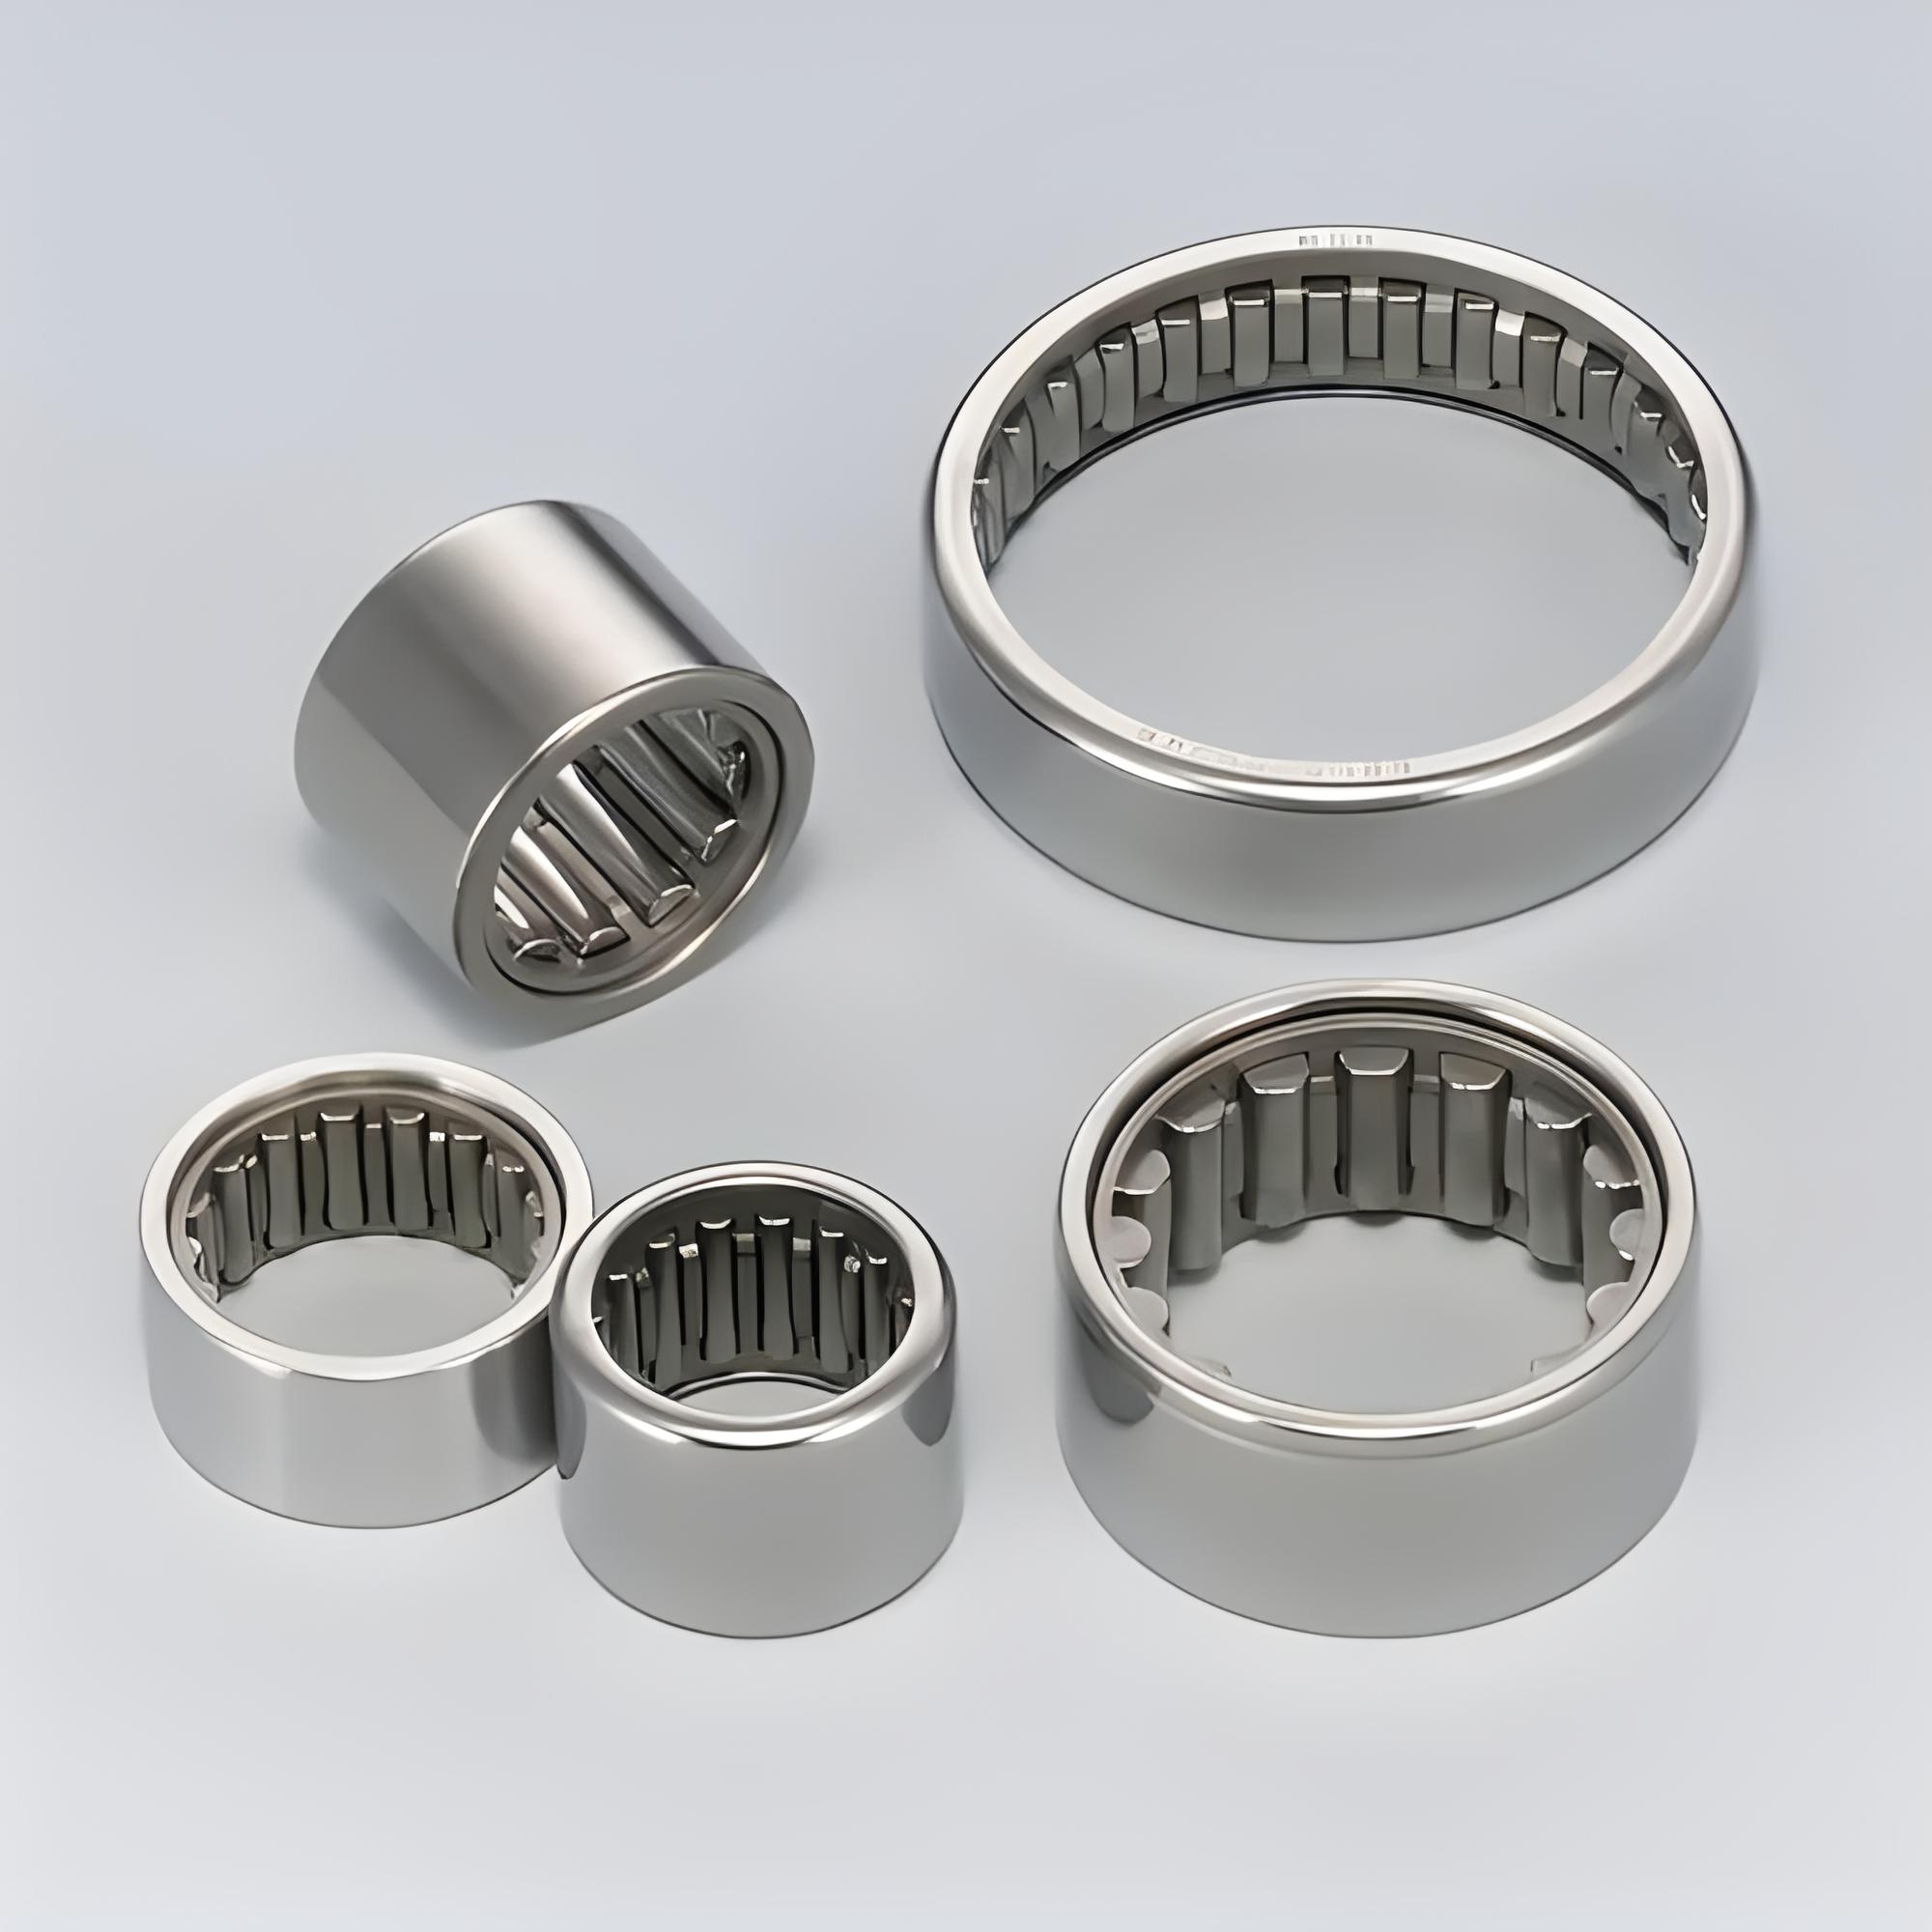 Bearing unit accessories